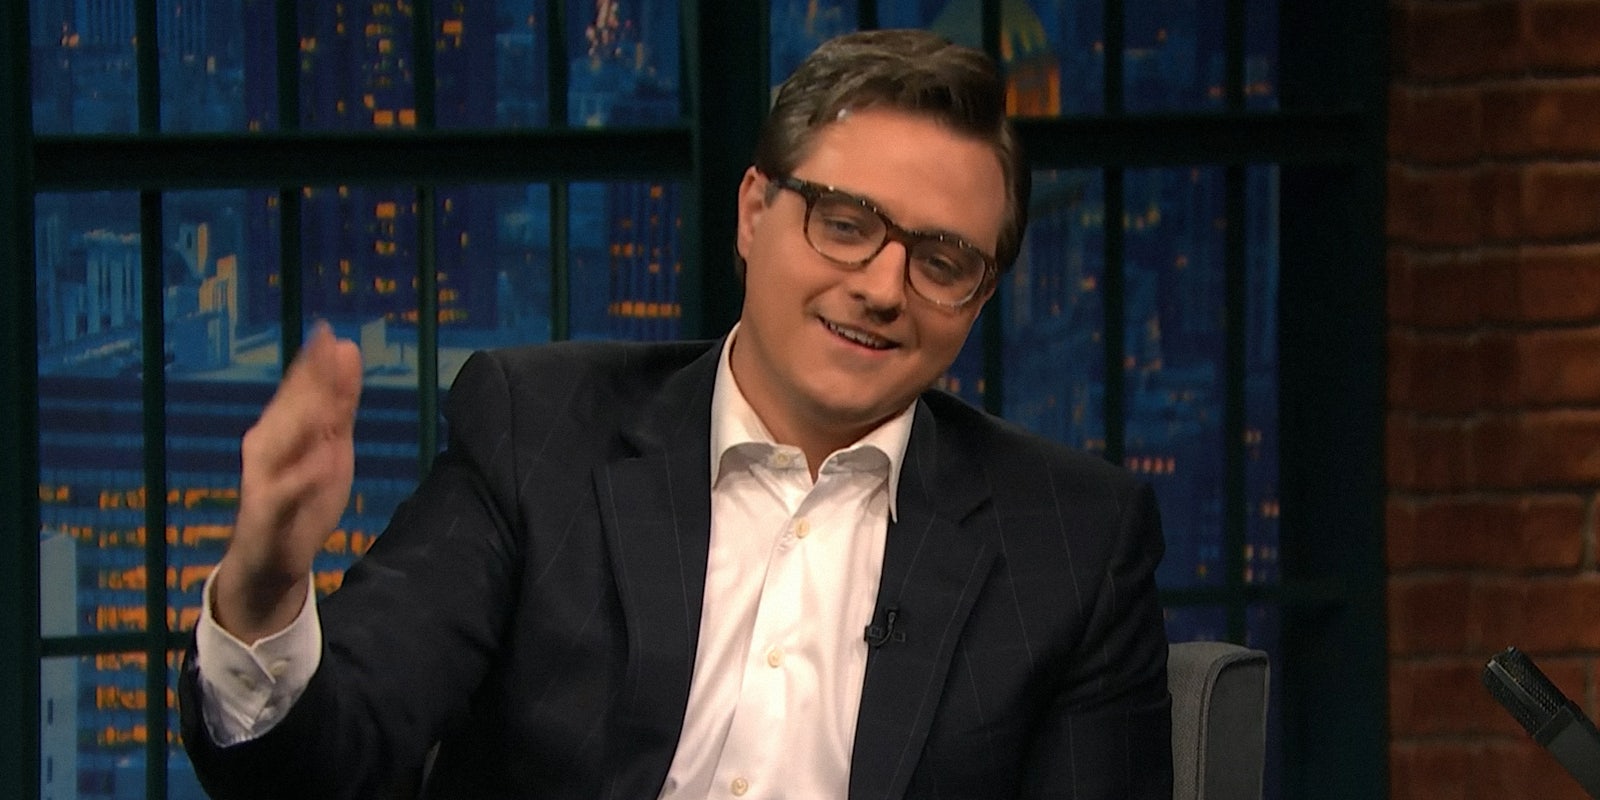 Chris Hayes on Late Night with Seth Meyers